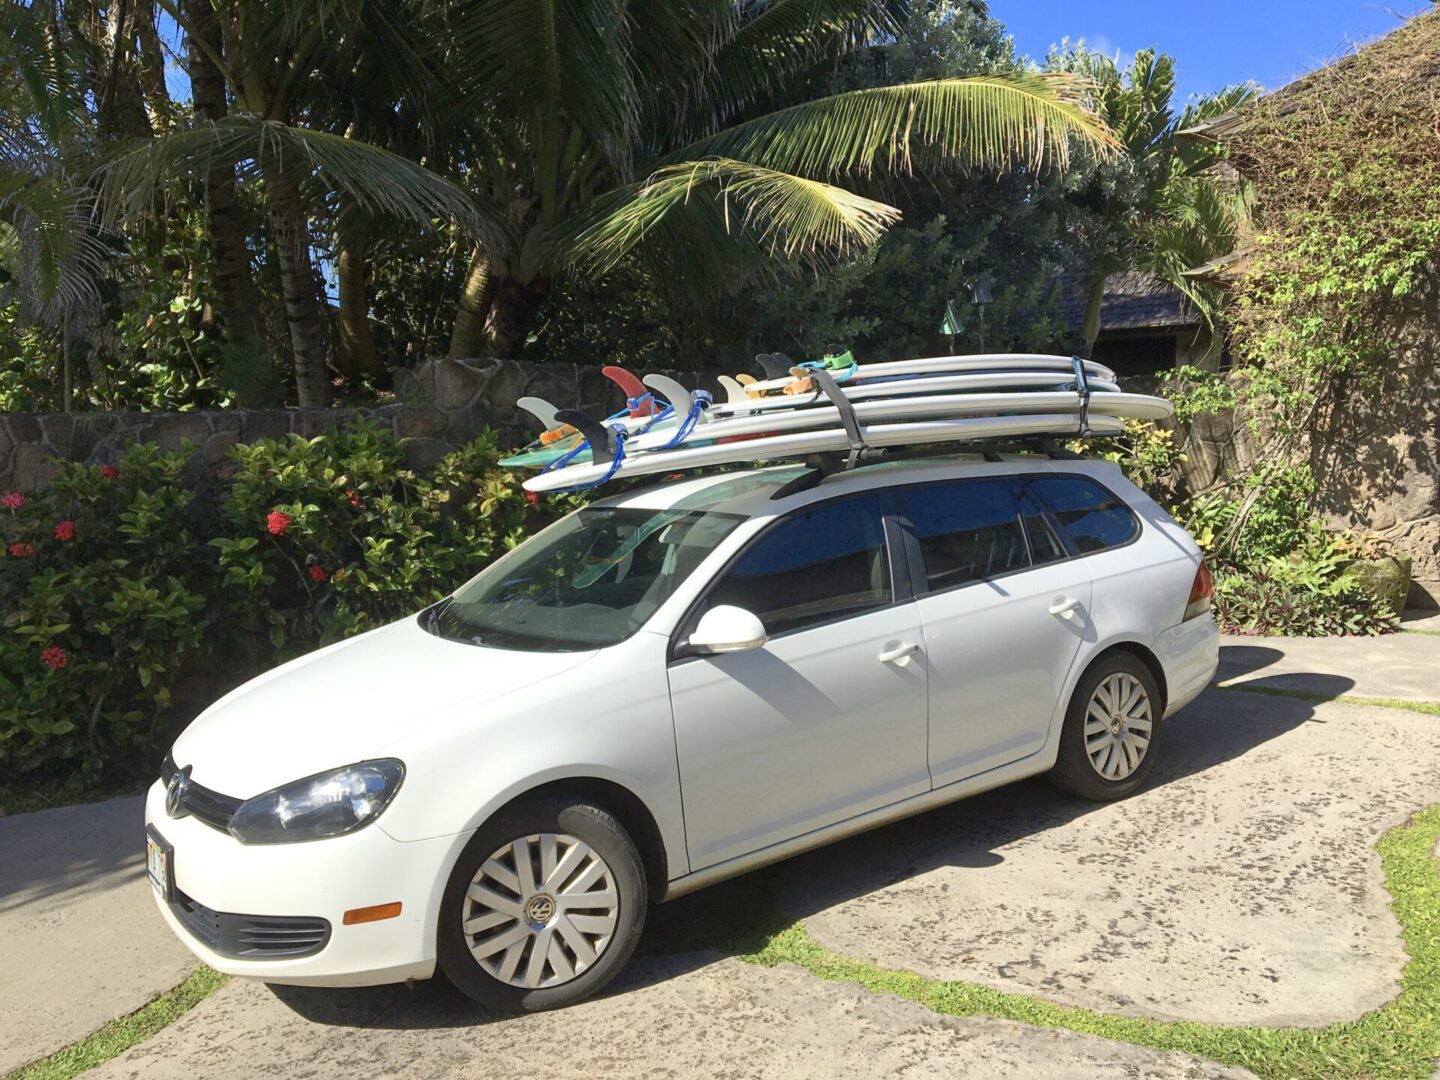 A white car with surfboards on top of it.